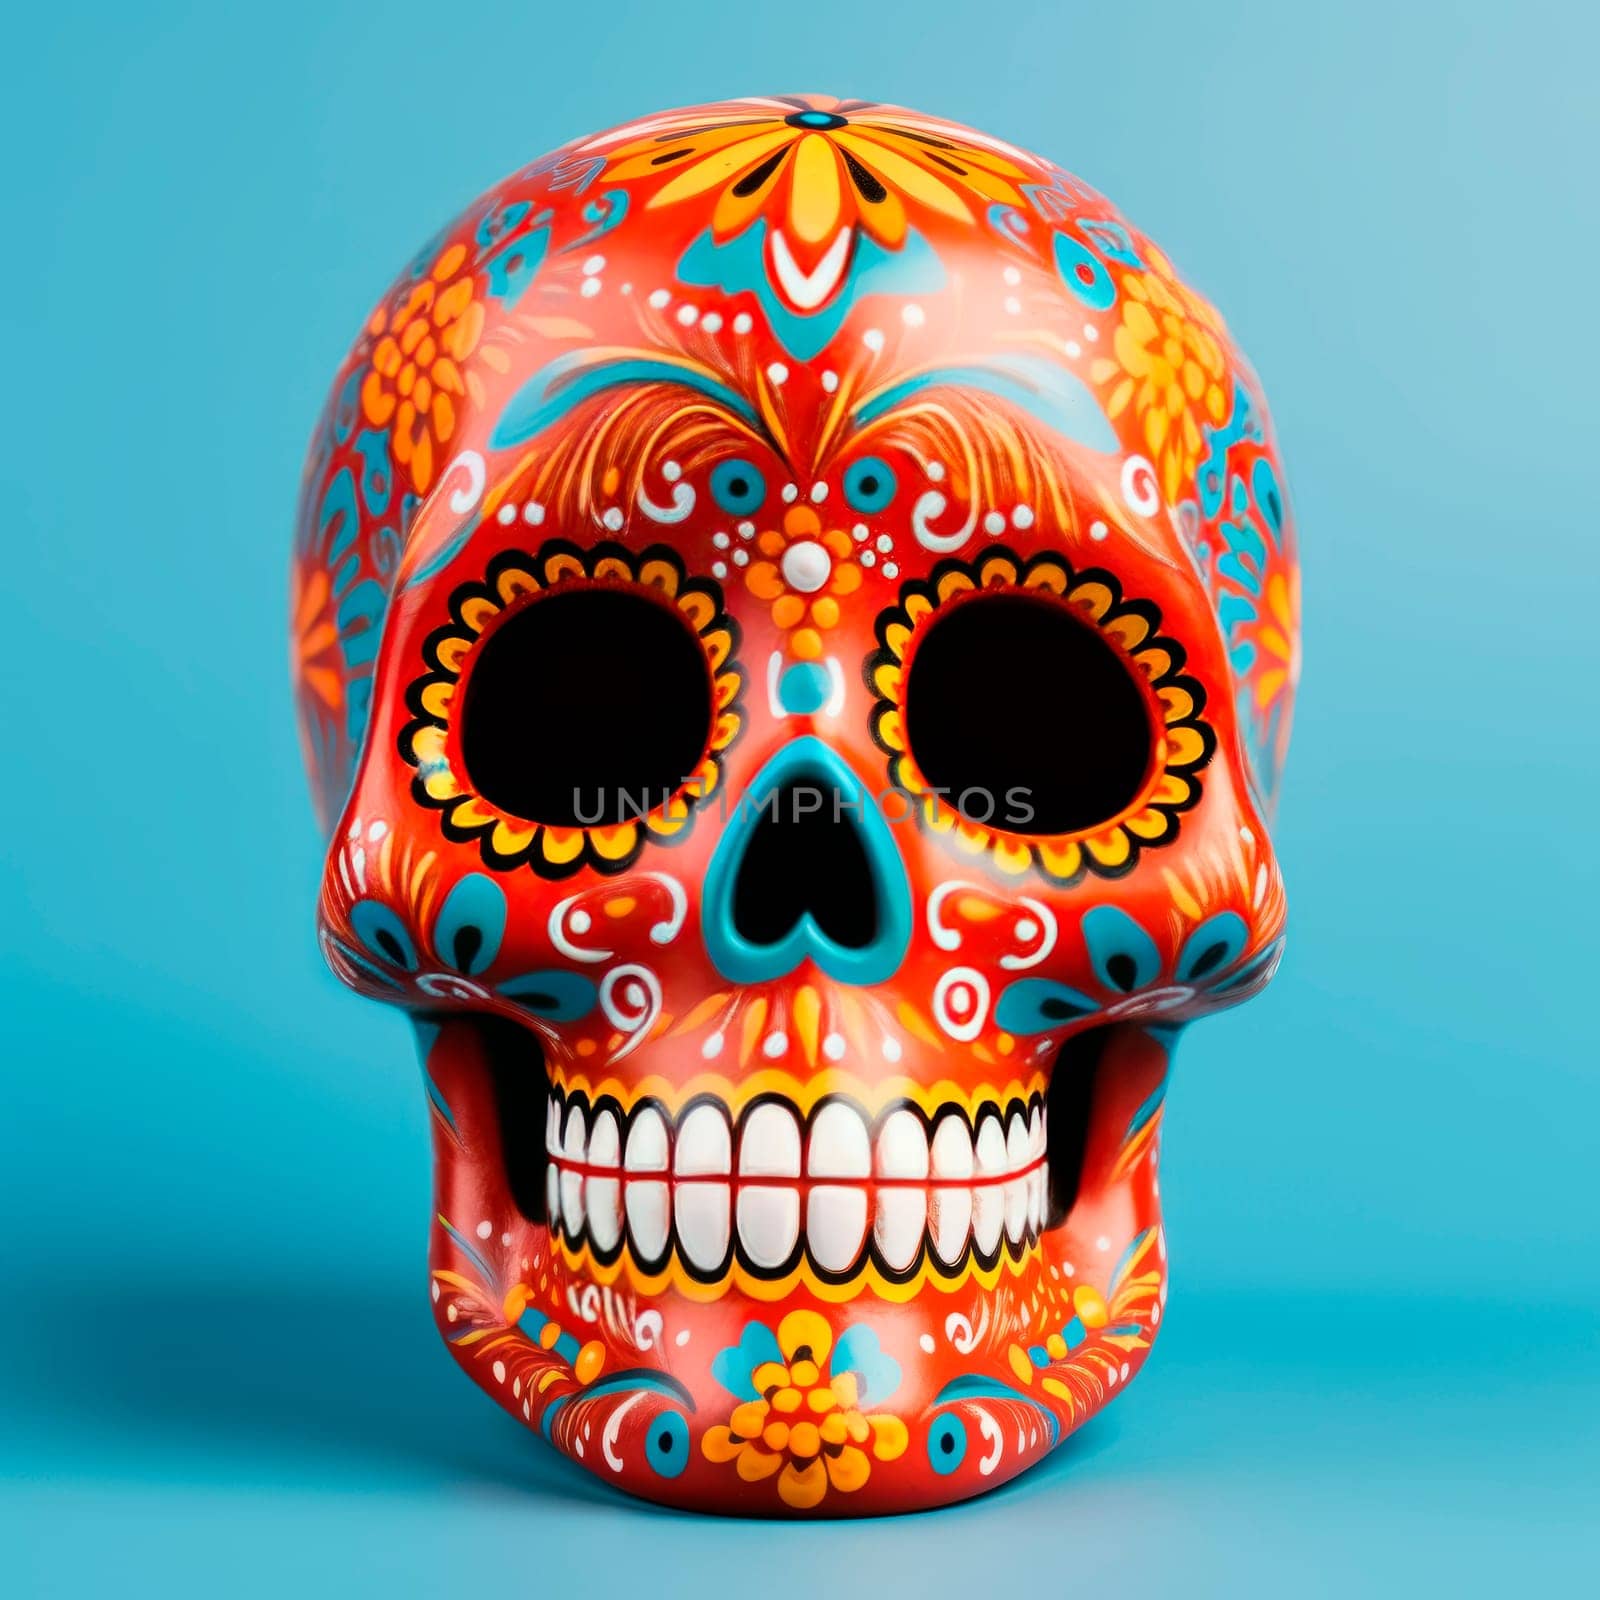 The bright sugarloaf skull is made in Mexican traditions. by Spirina